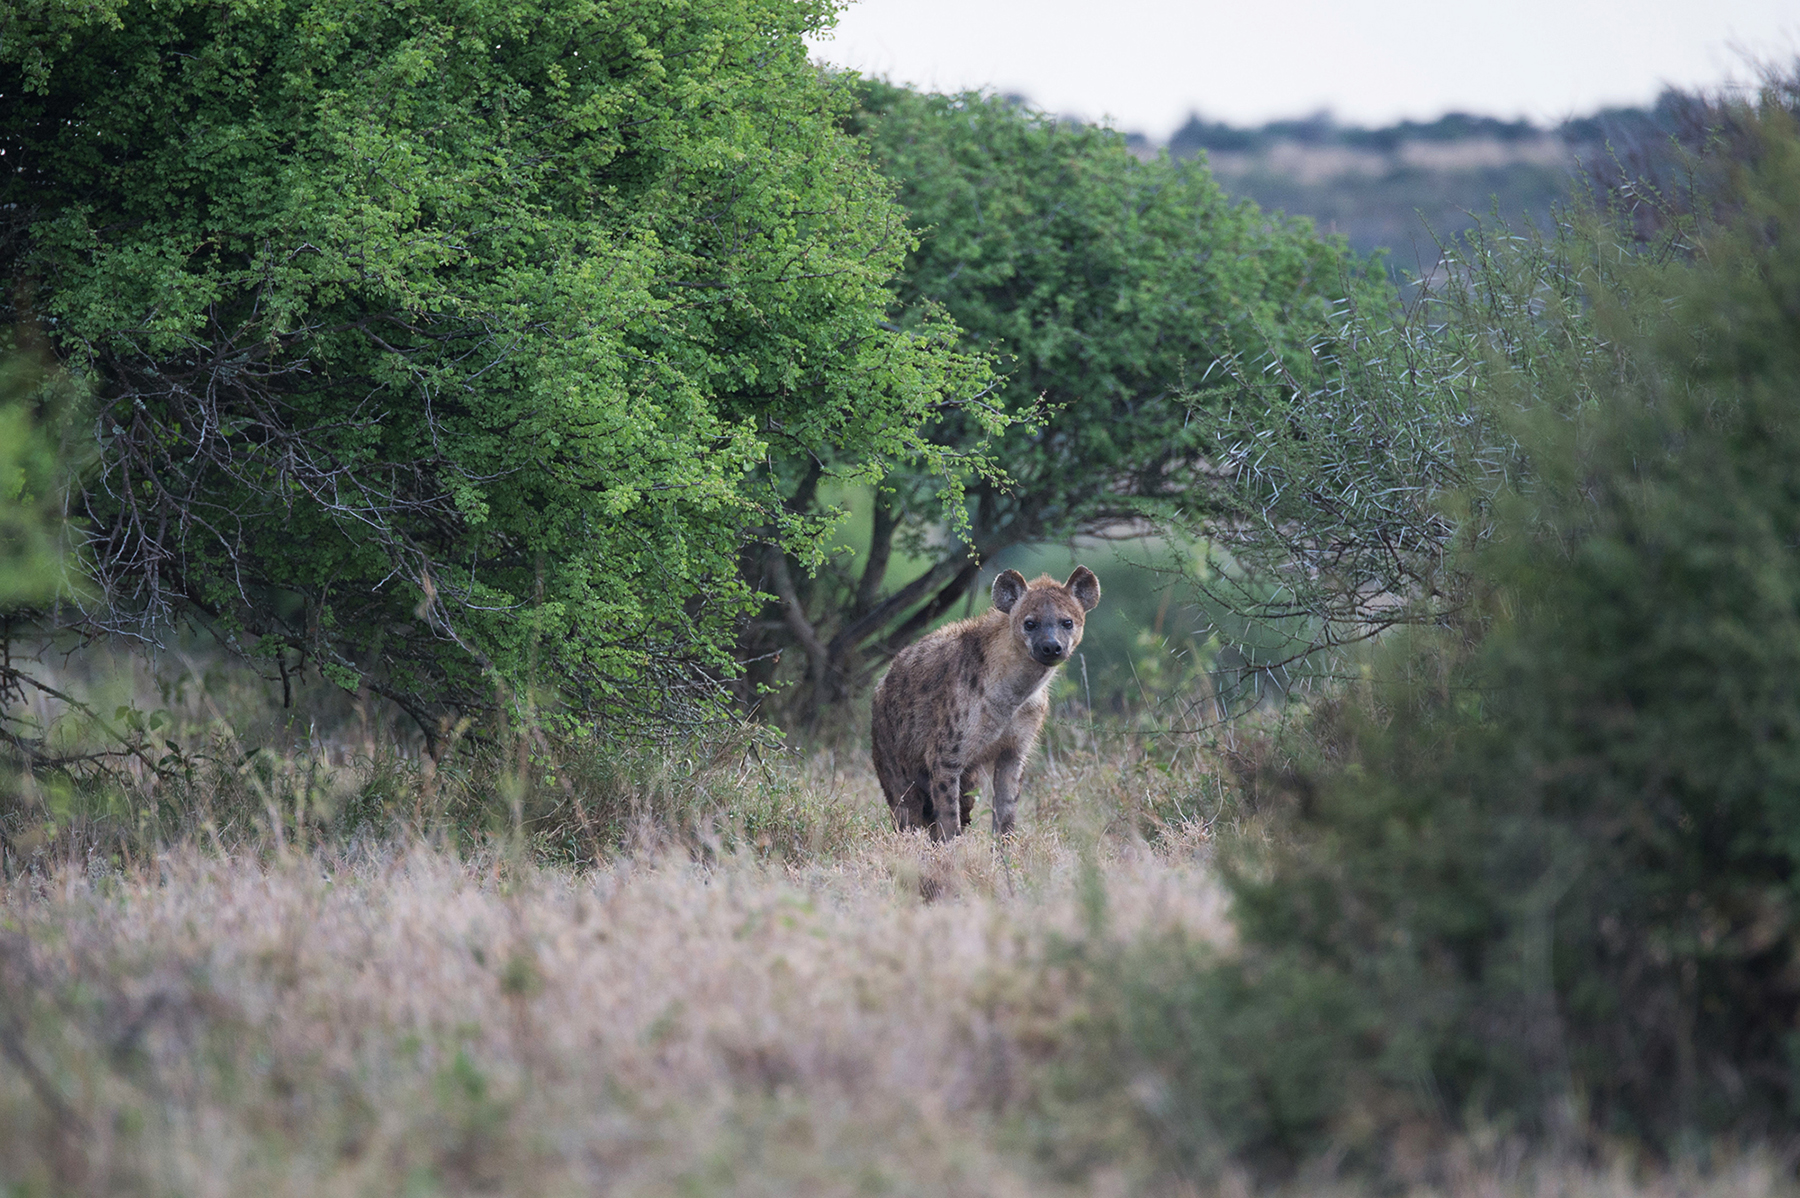 A Second Look at Hyenas, Part 2